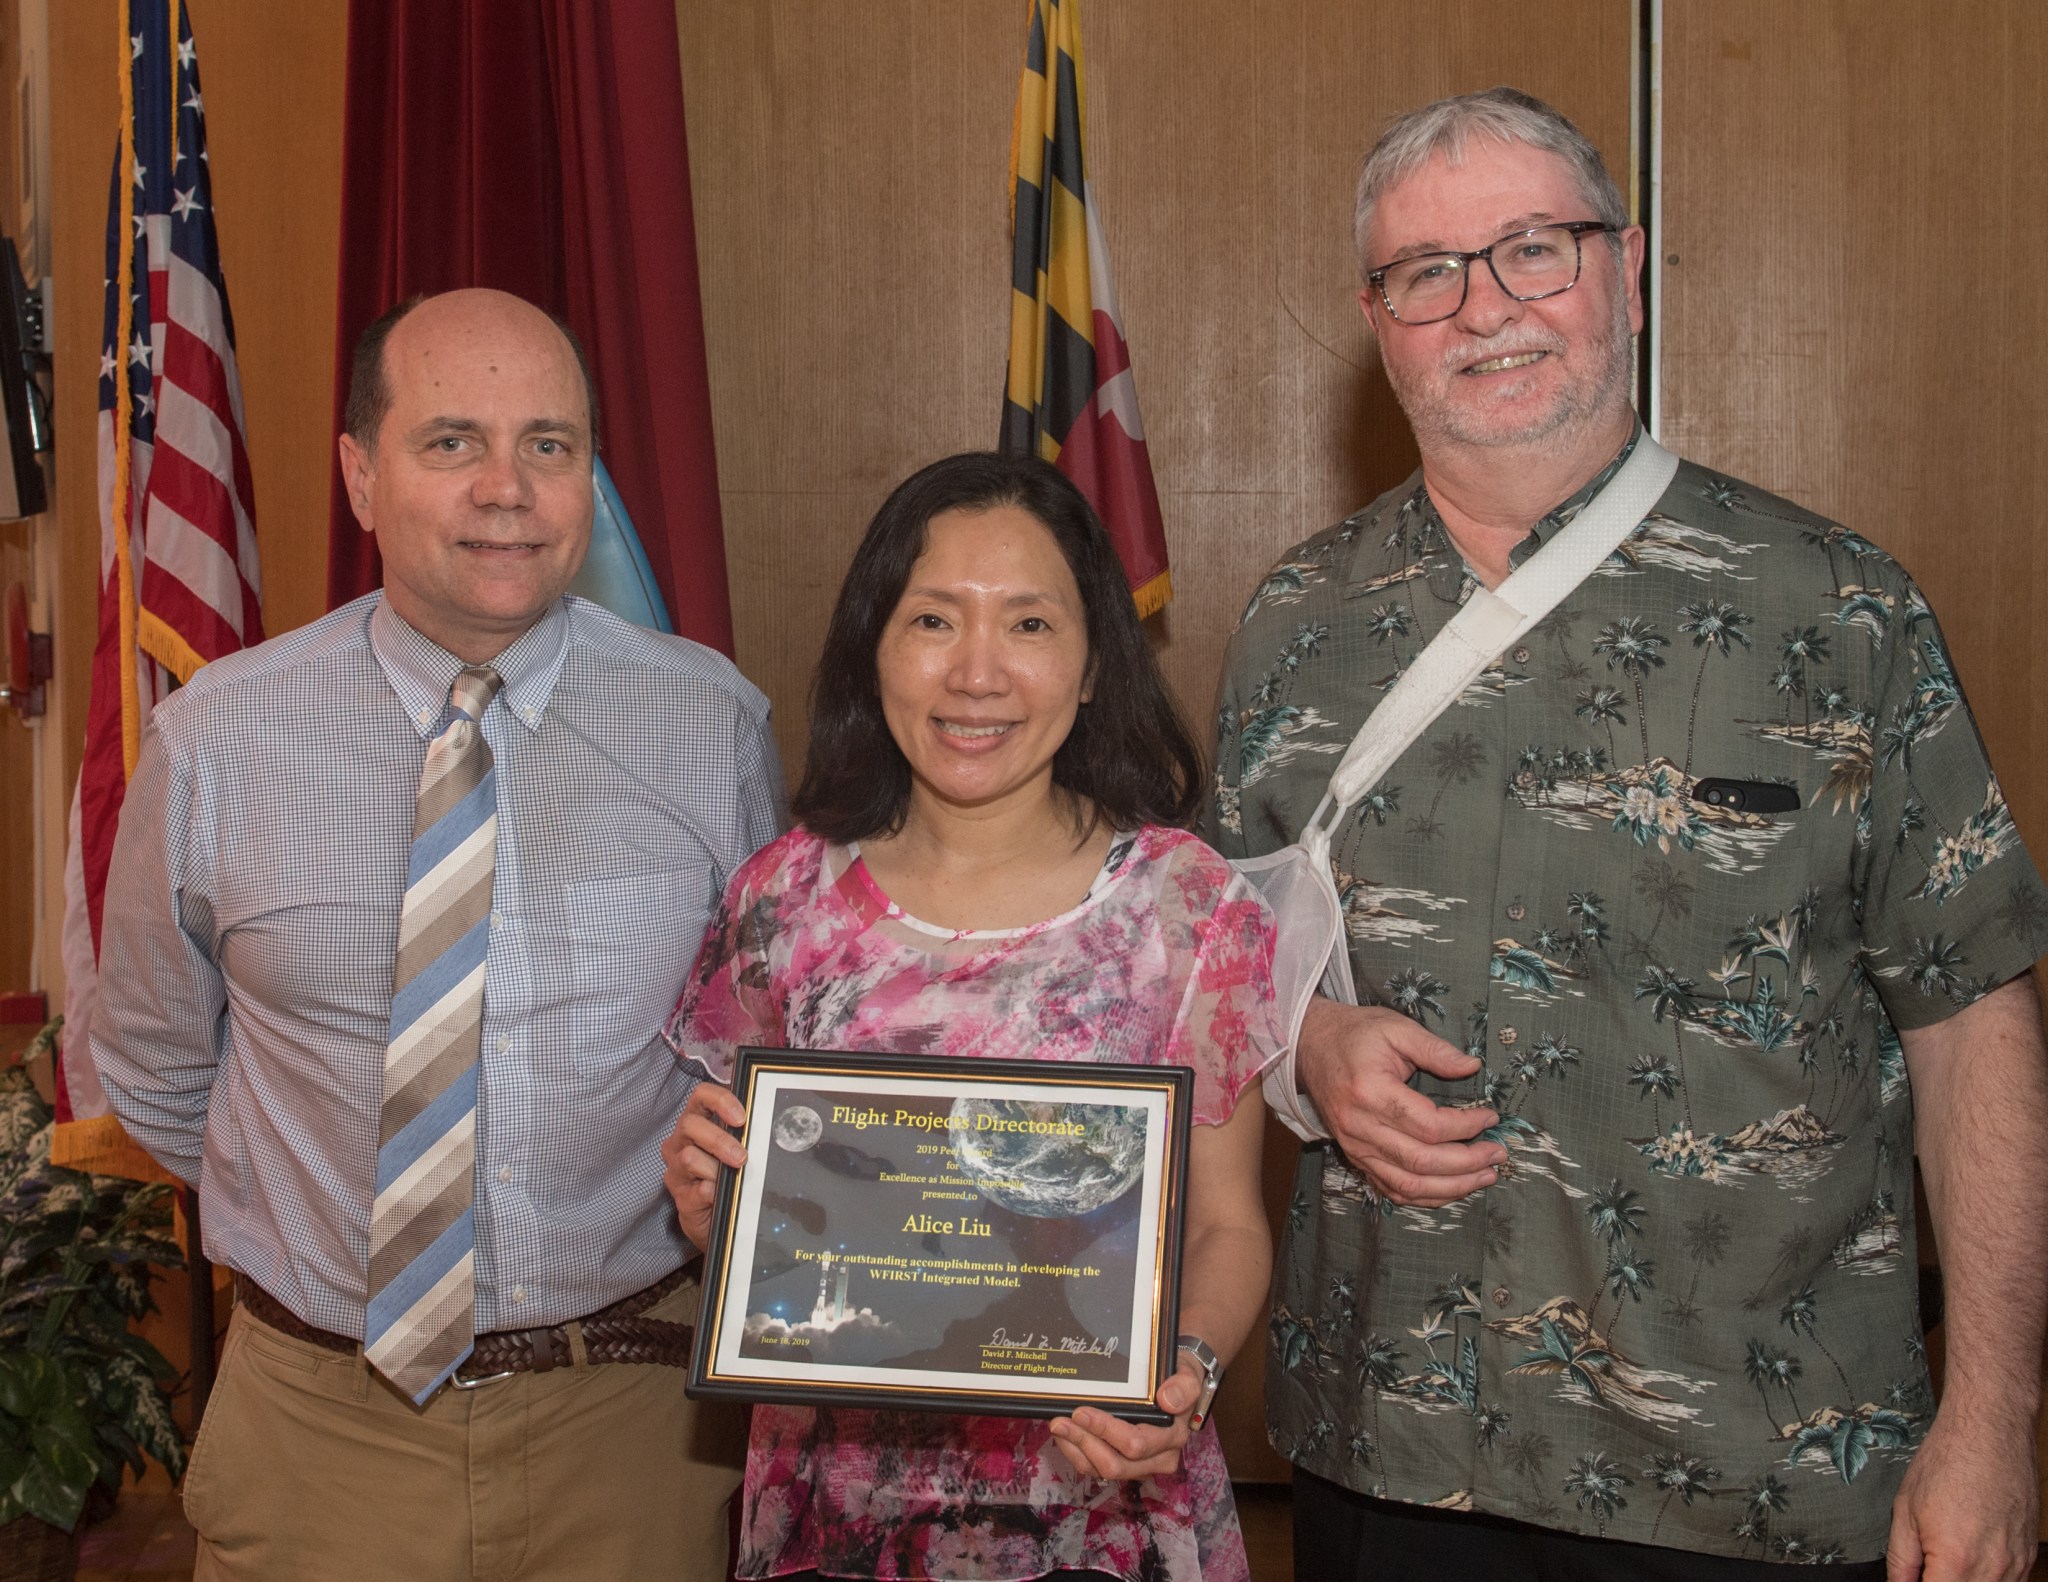 An Asian woman wearing a pink blouse holds a plaque between two white men. The man on the left wears a blue shirt and striped tie. The man on the right has gray hair/beard, and wears a green Hawaiian shirt and has his right arm in a sling.